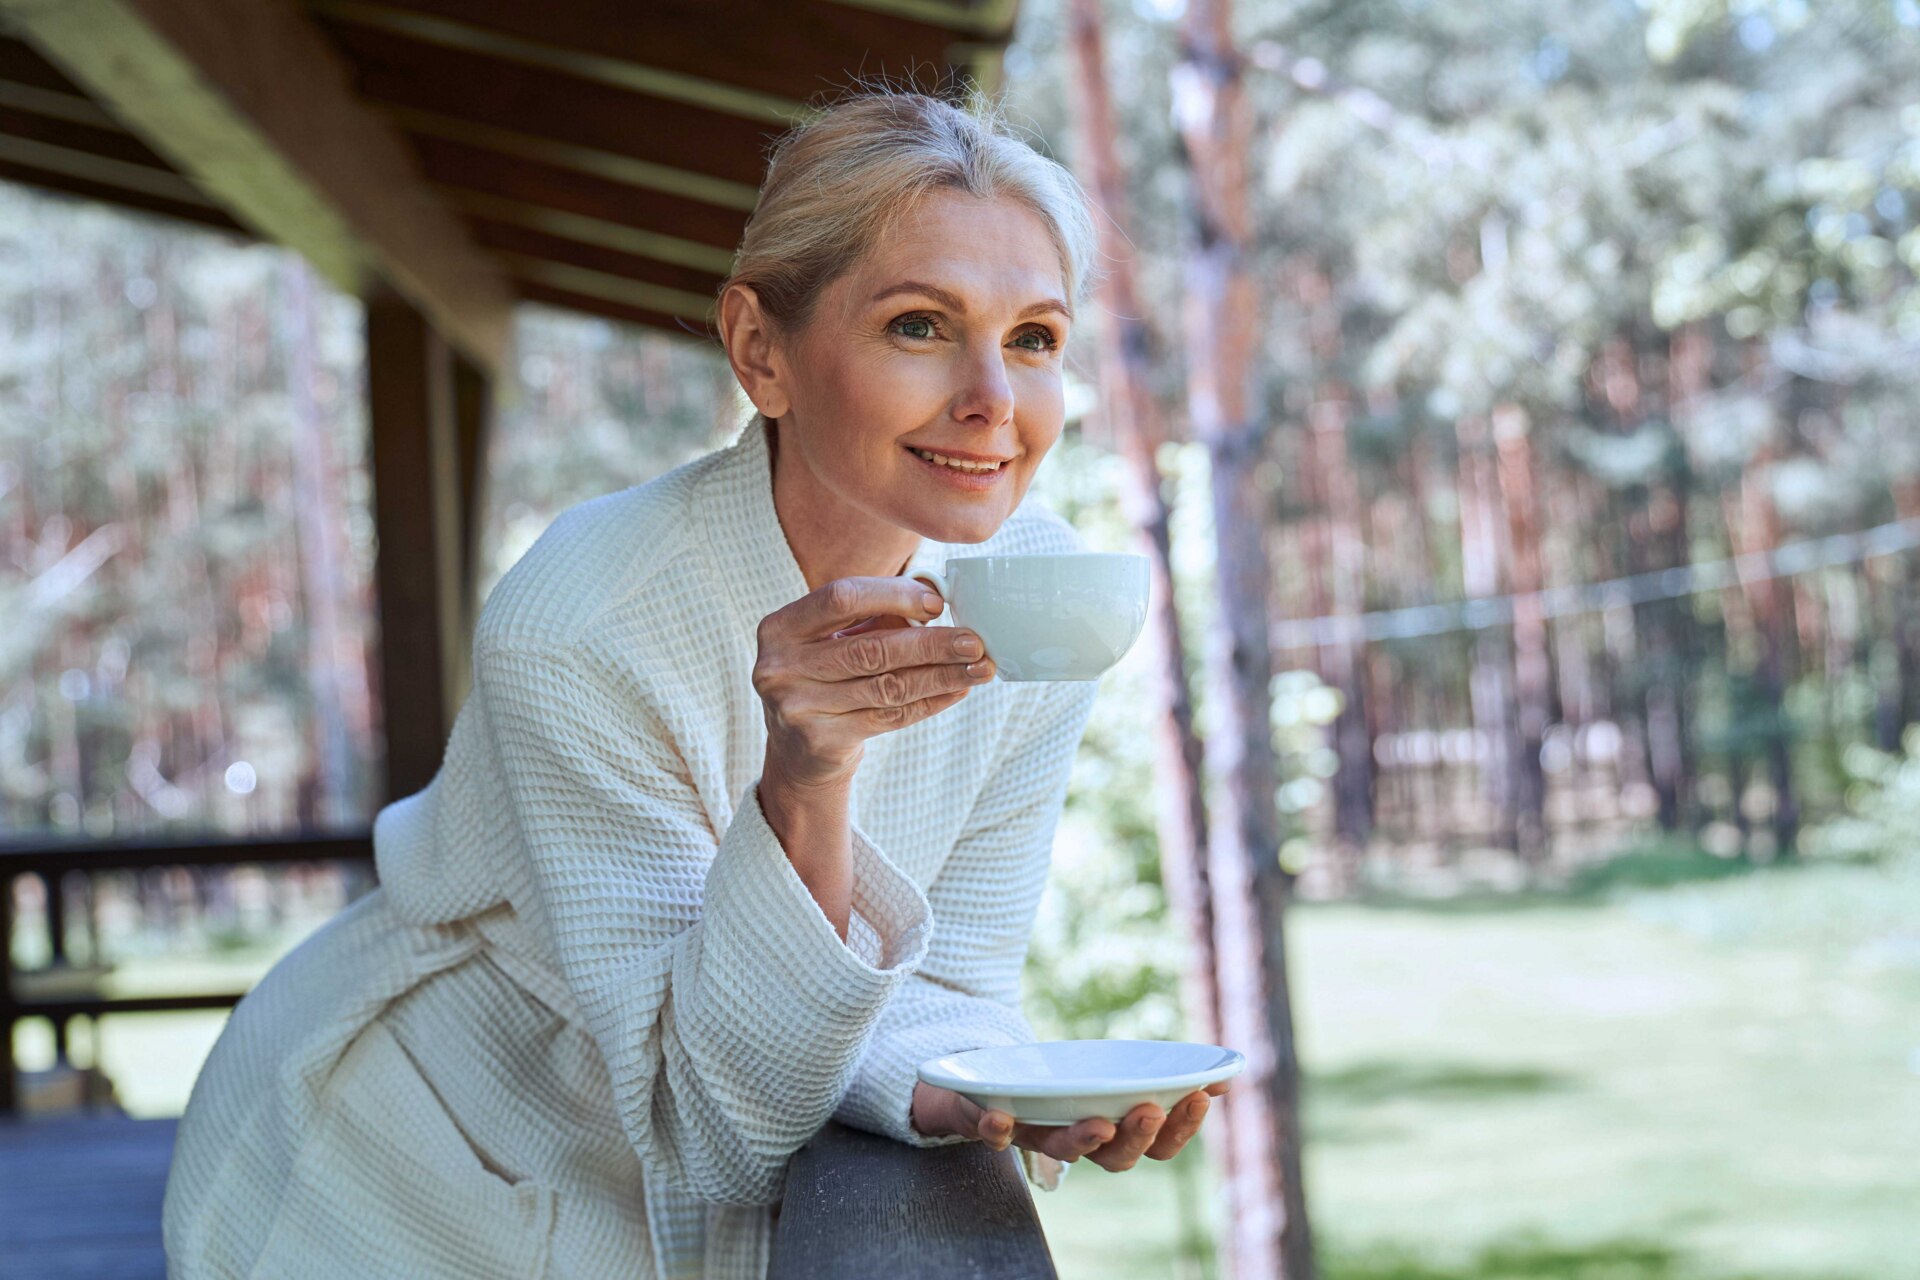 A woman sips coffee on an outdoor patio while listening to nature sounds.